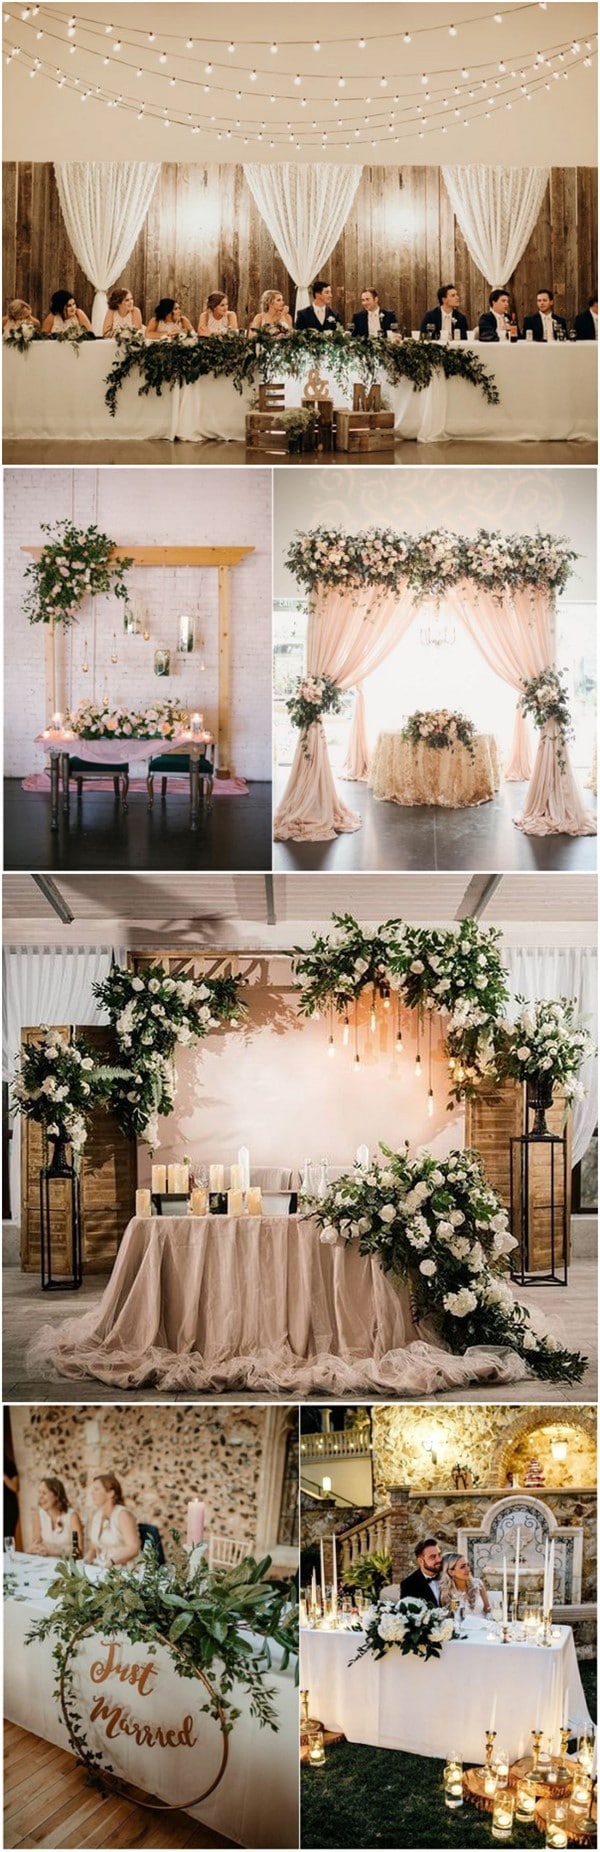 20 + Wedding Sweetheart Table Ideas For Every Season - Oh The Wedding Day